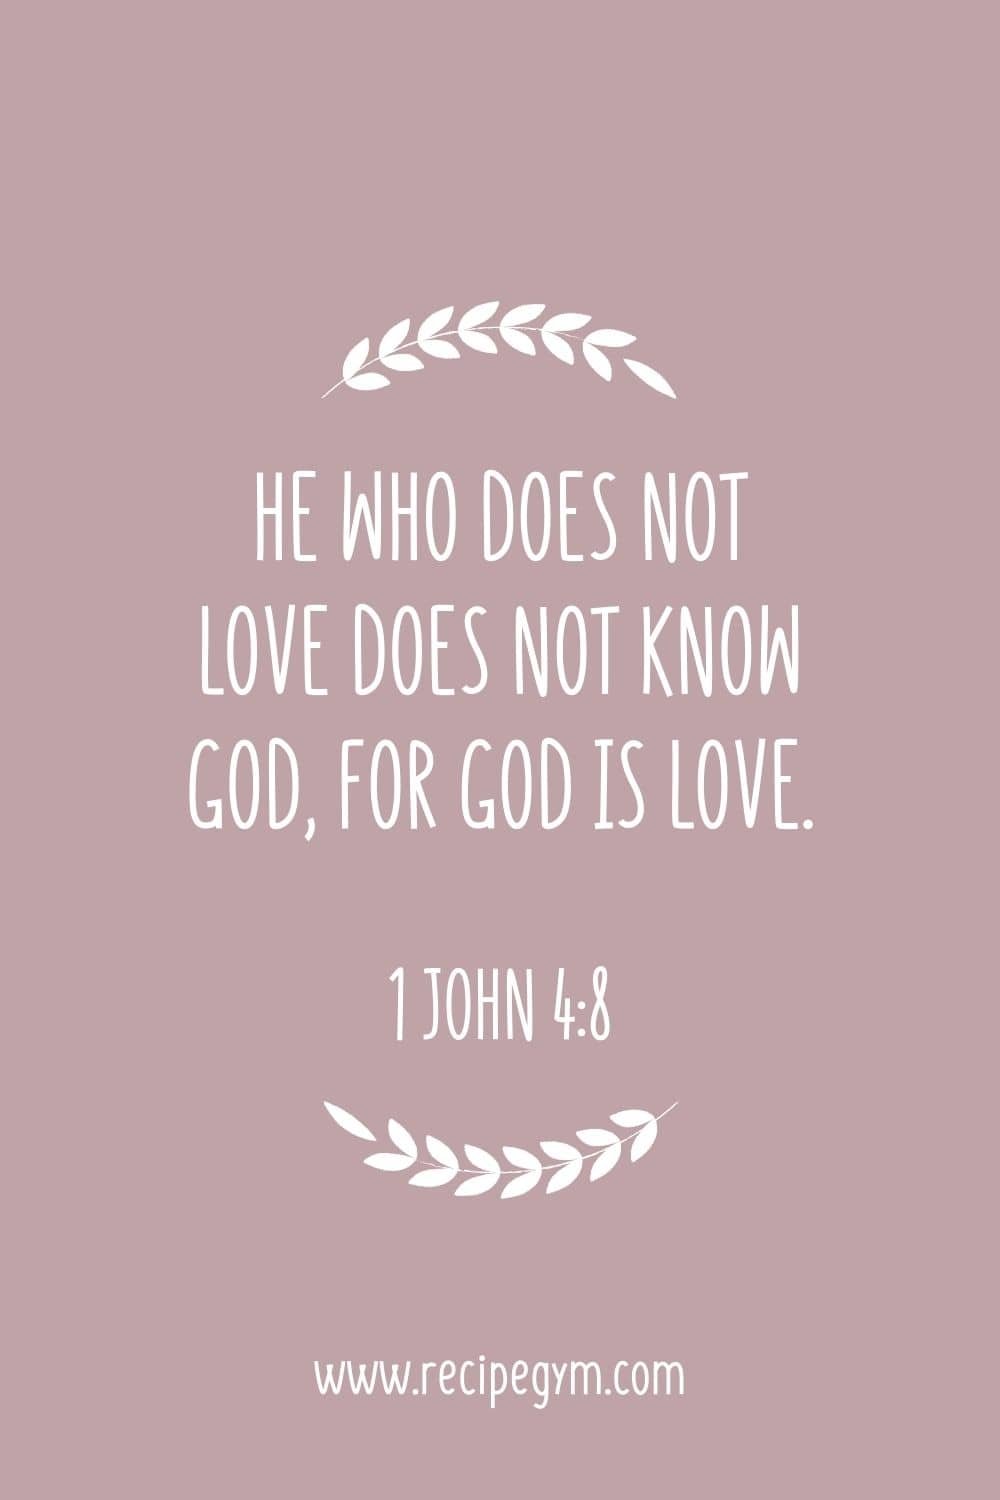 3Q He who does not love does not know God for God is love